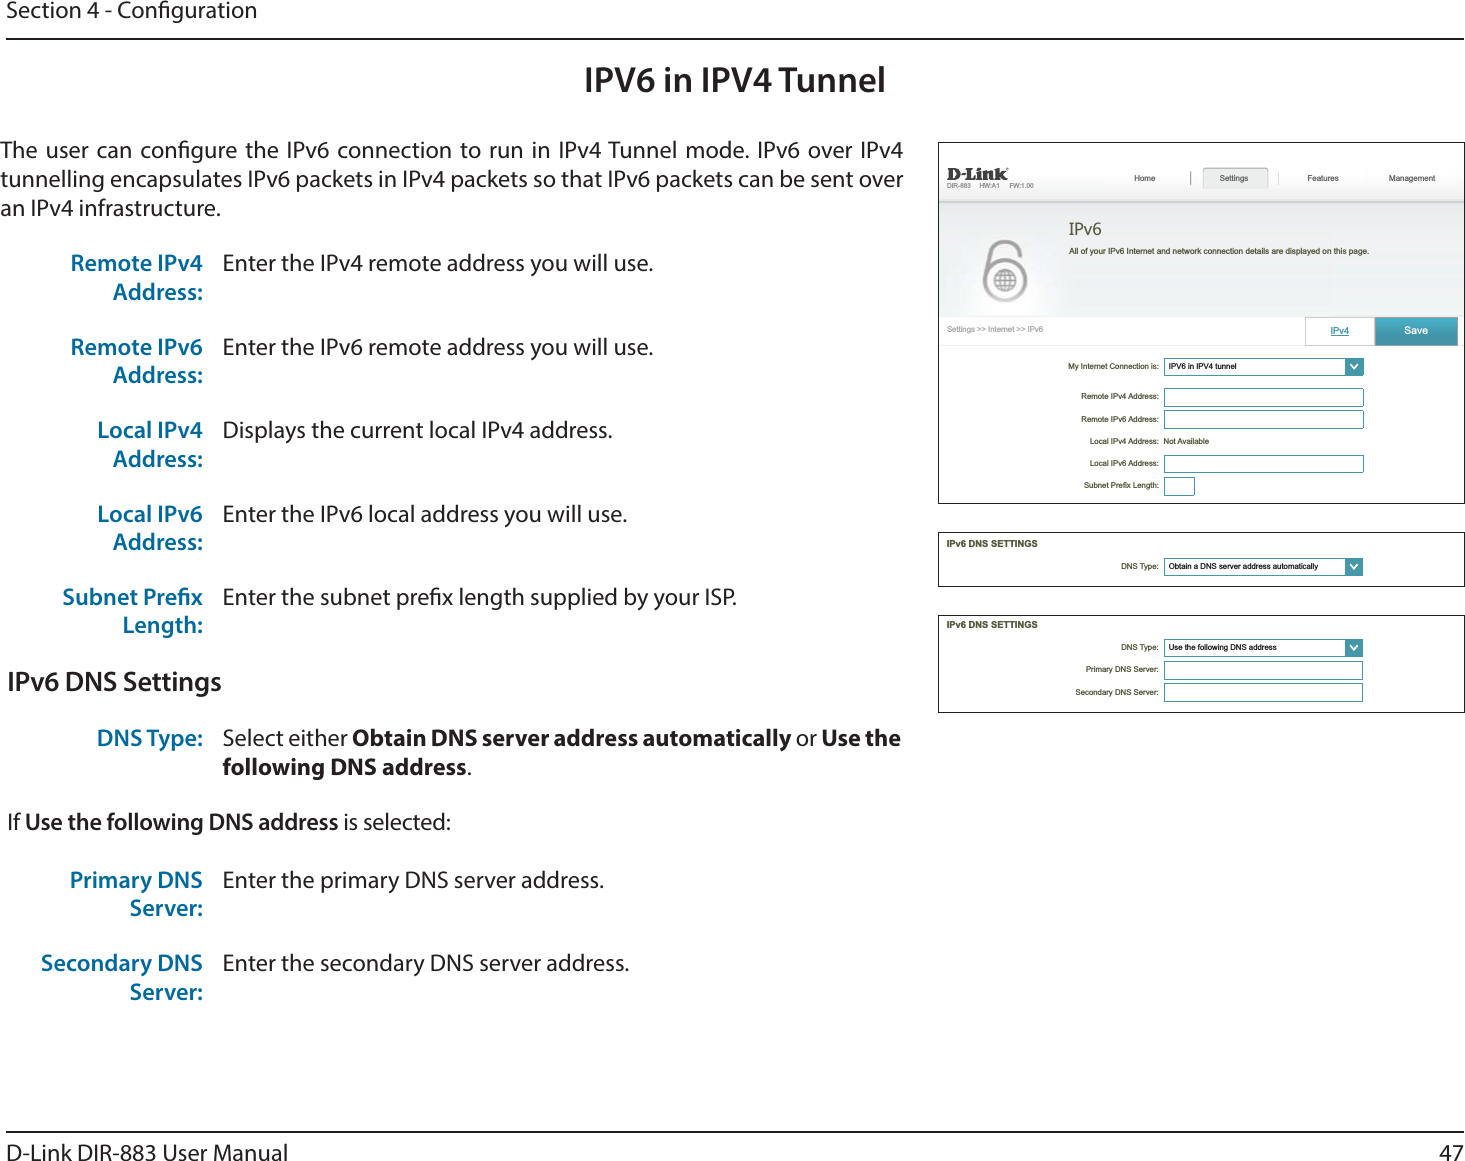 47D-Link DIR-883 User ManualSection 4 - CongurationIPV6 in IPV4 TunnelThe user can congure the IPv6 connection to run in IPv4 Tunnel mode. IPv6 over IPv4 tunnelling encapsulates IPv6 packets in IPv4 packets so that IPv6 packets can be sent over an IPv4 infrastructure.Remote IPv4 Address:Enter the IPv4 remote address you will use.Remote IPv6 Address:Enter the IPv6 remote address you will use.Local IPv4 Address:Displays the current local IPv4 address.Local IPv6 Address:Enter the IPv6 local address you will use.Subnet Prex Length:Enter the subnet prex length supplied by your ISP.IPv6 DNS SettingsDNS Type: Select either Obtain DNS server address automatically or Use the following DNS address.If Use the following DNS address is selected:Primary DNS Server:Enter the primary DNS server address. Secondary DNS Server:Enter the secondary DNS server address.My Internet Connection is: ໹   Features Management Not Available IPv6 ໹ ໹